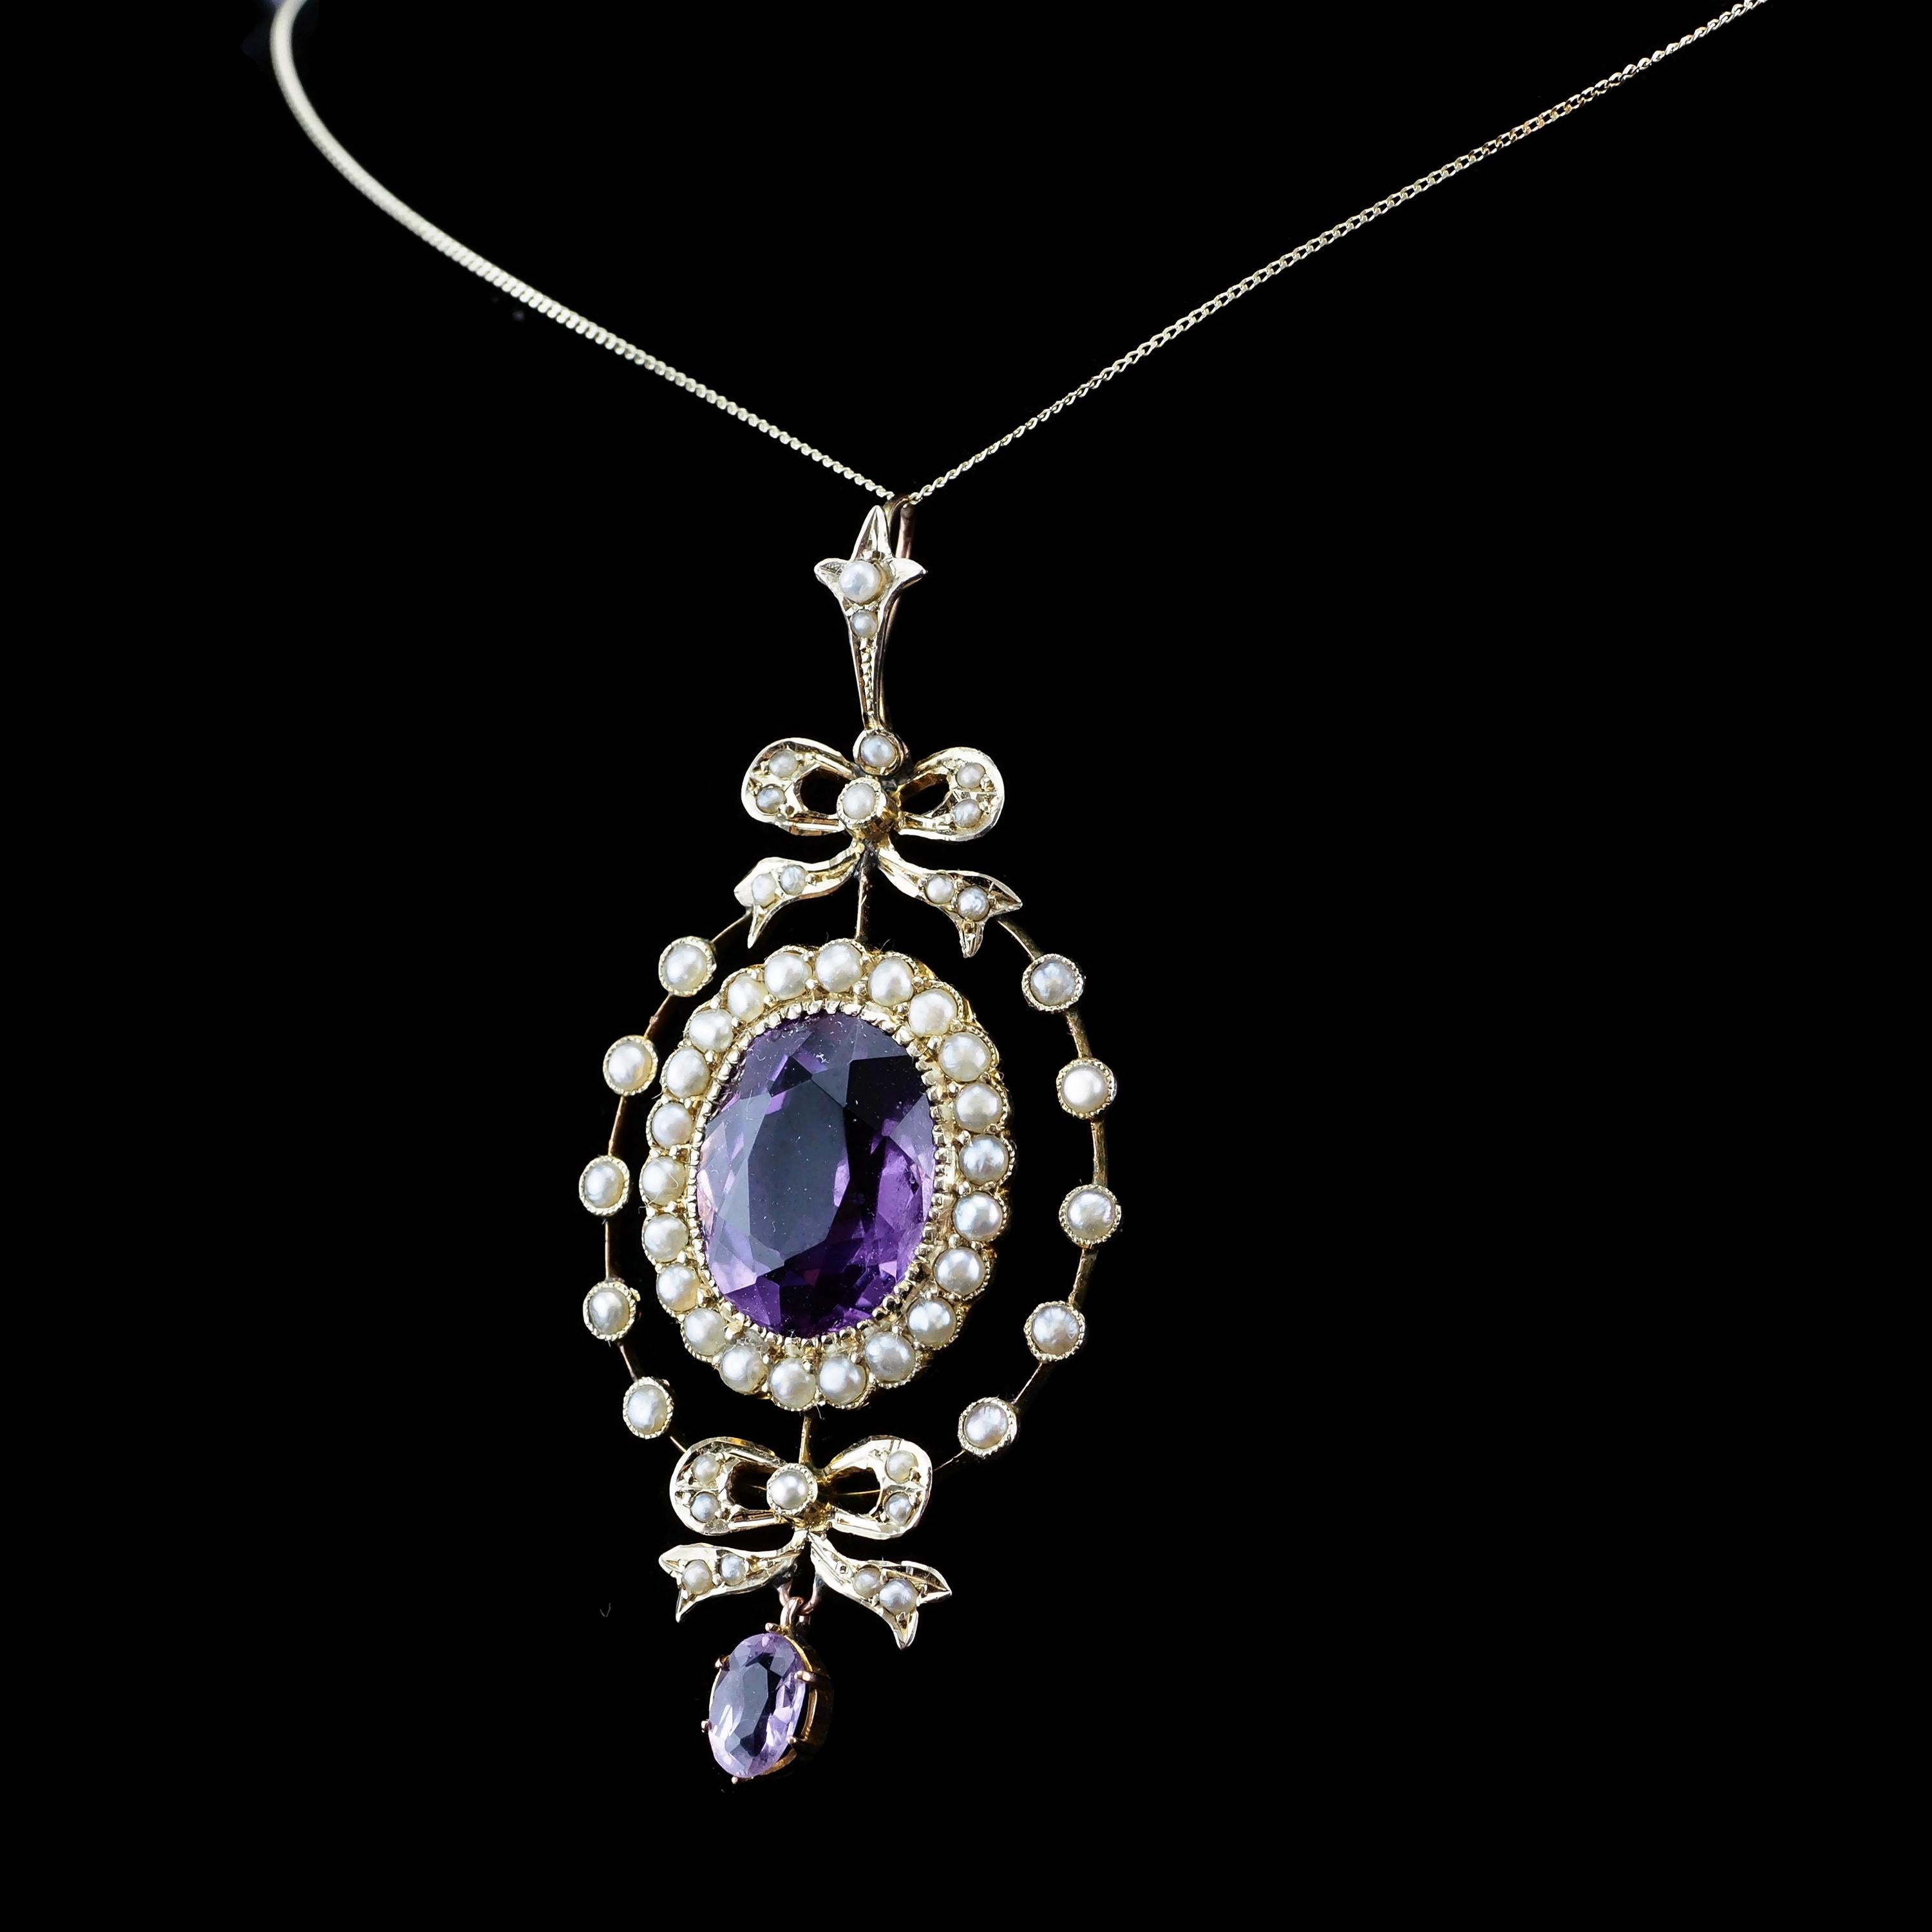 Antique Edwardian Amethyst & Seed Pearl 9k Gold Necklace Pendant, circa 1905 4